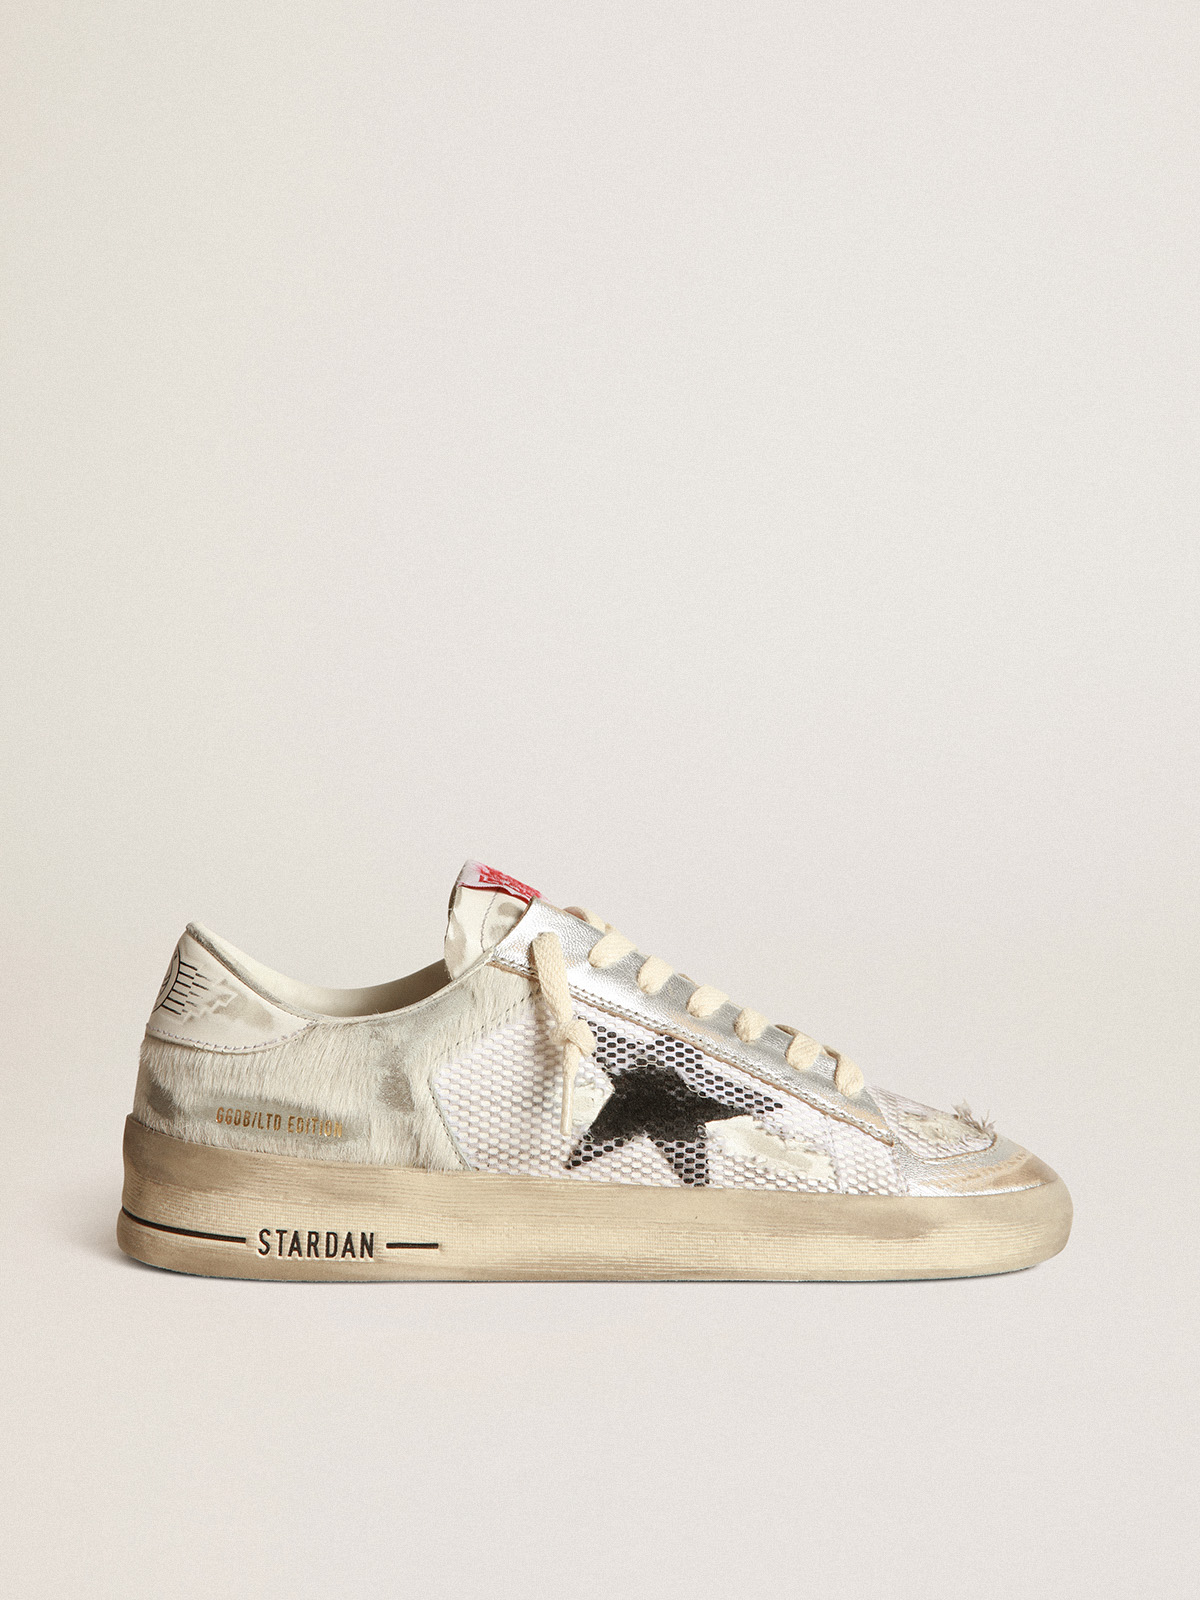 Stardan LAB sneakers in white pony skin and leather with black suede star |  Golden Goose